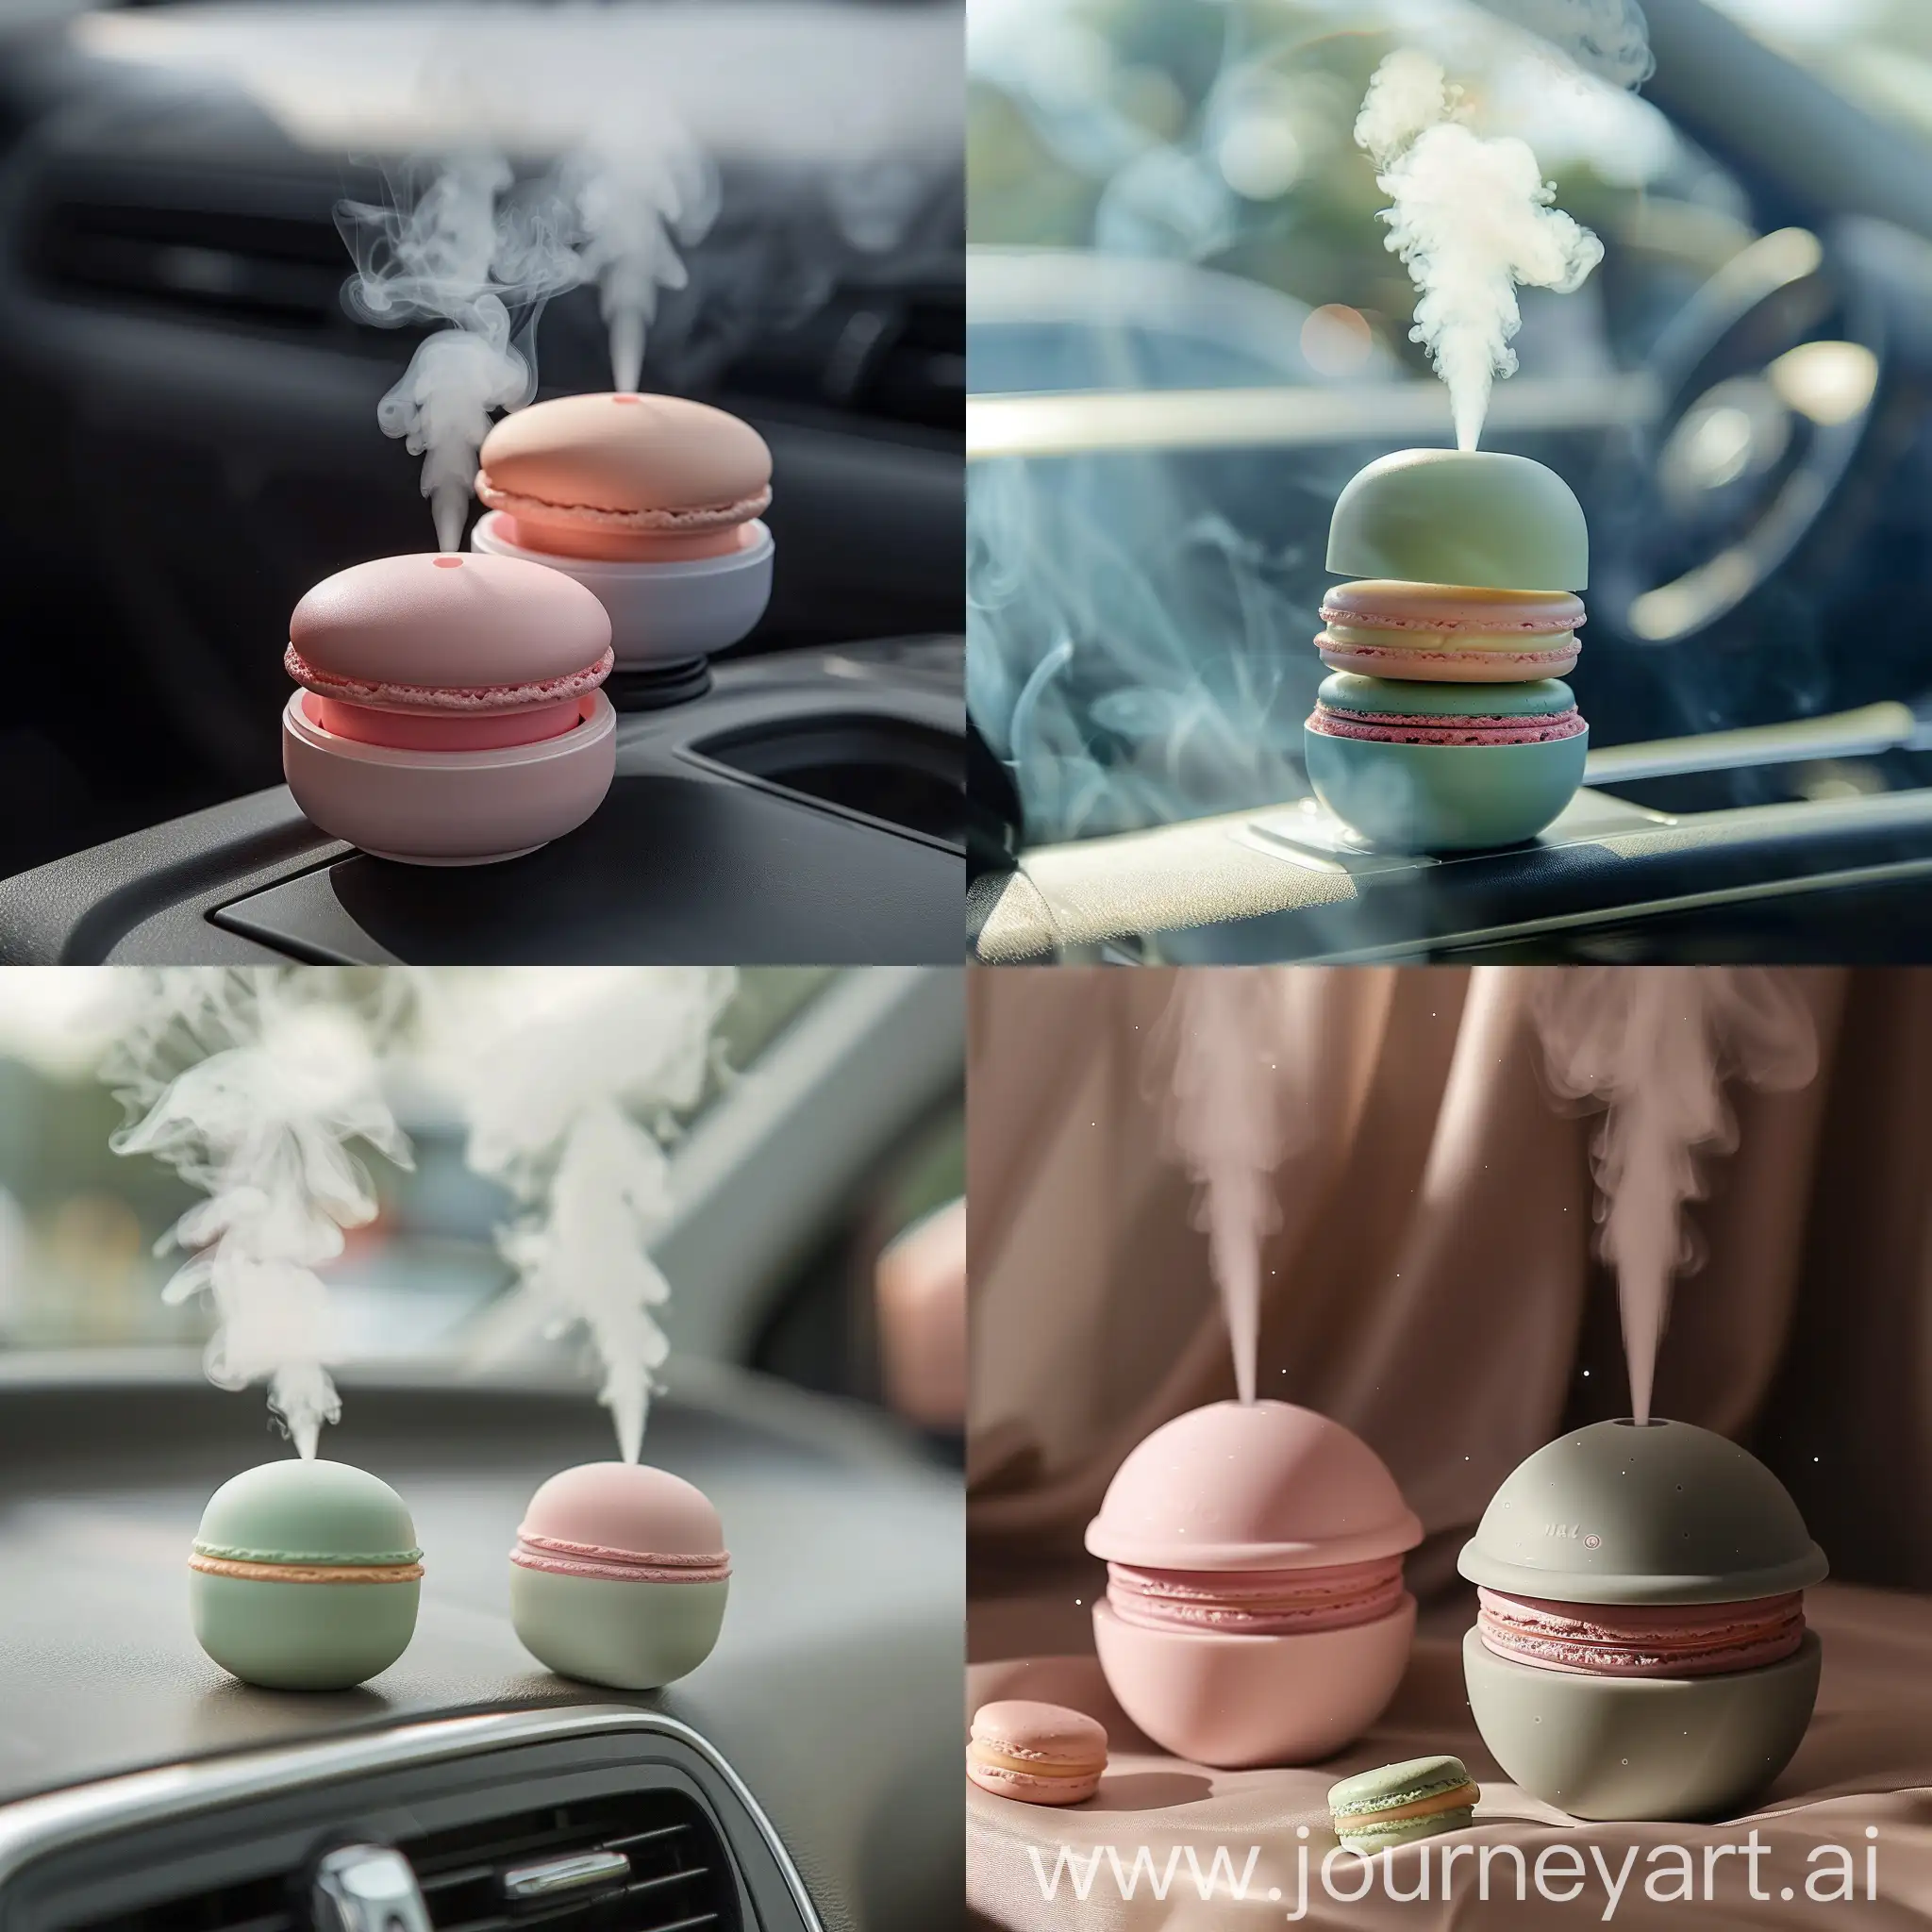 Elegant-Car-Aromatherapy-with-Macaron-Colors-and-Planetary-Design-Concept